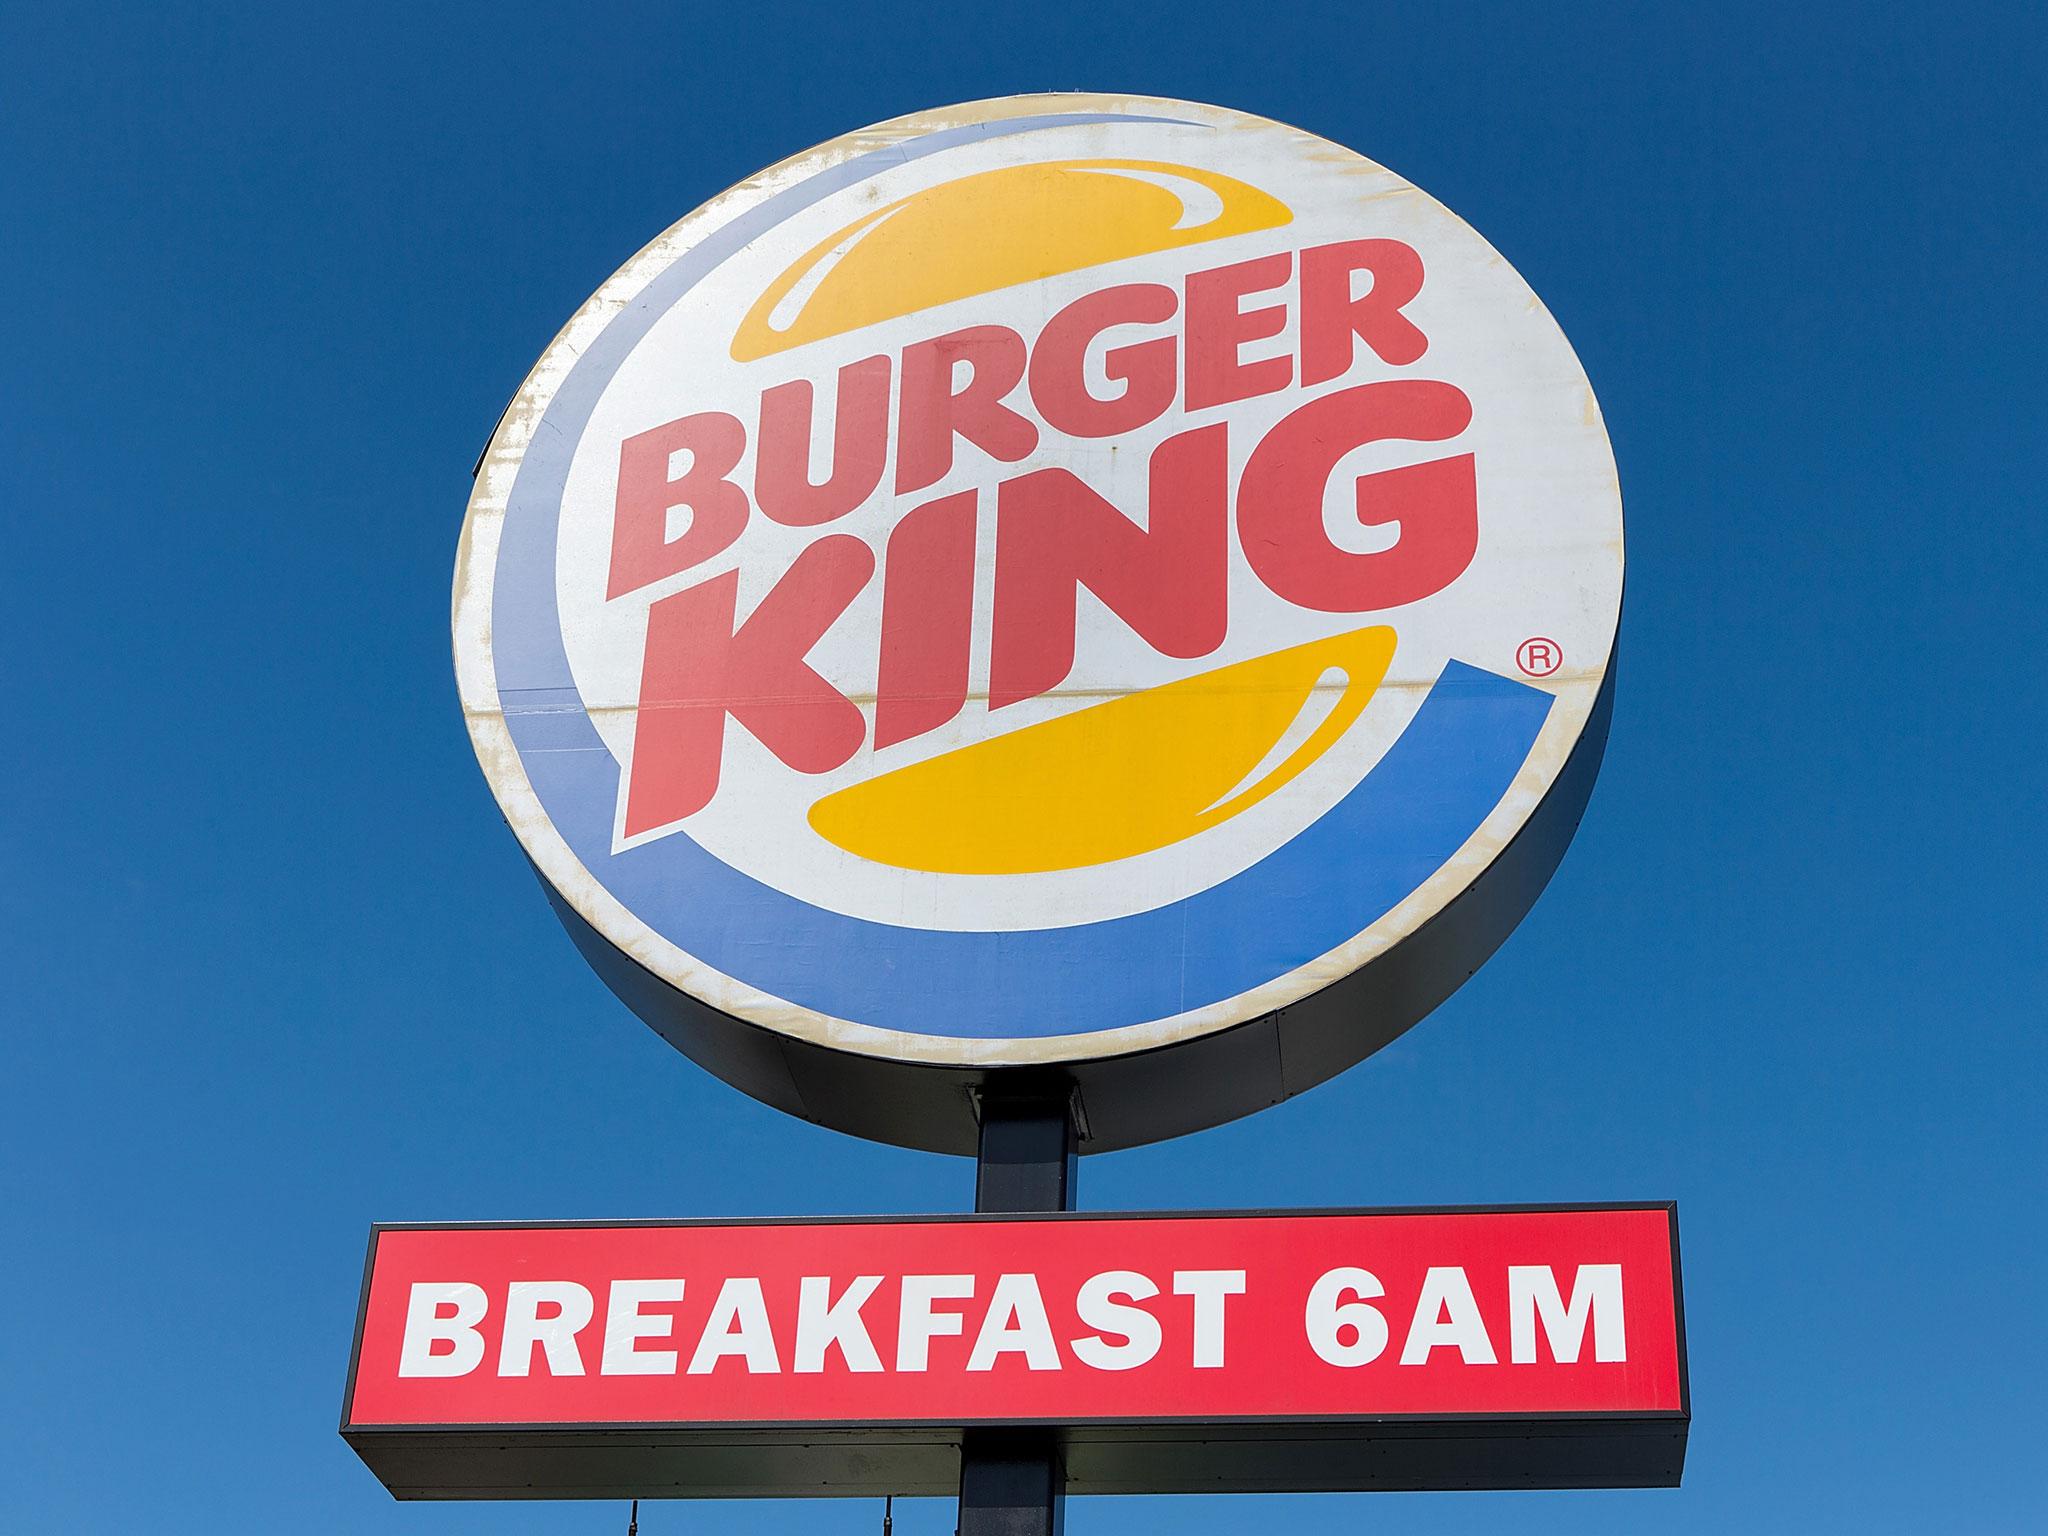 Burger King aims to make the change in US stores in 2017 and in Canada in 2018